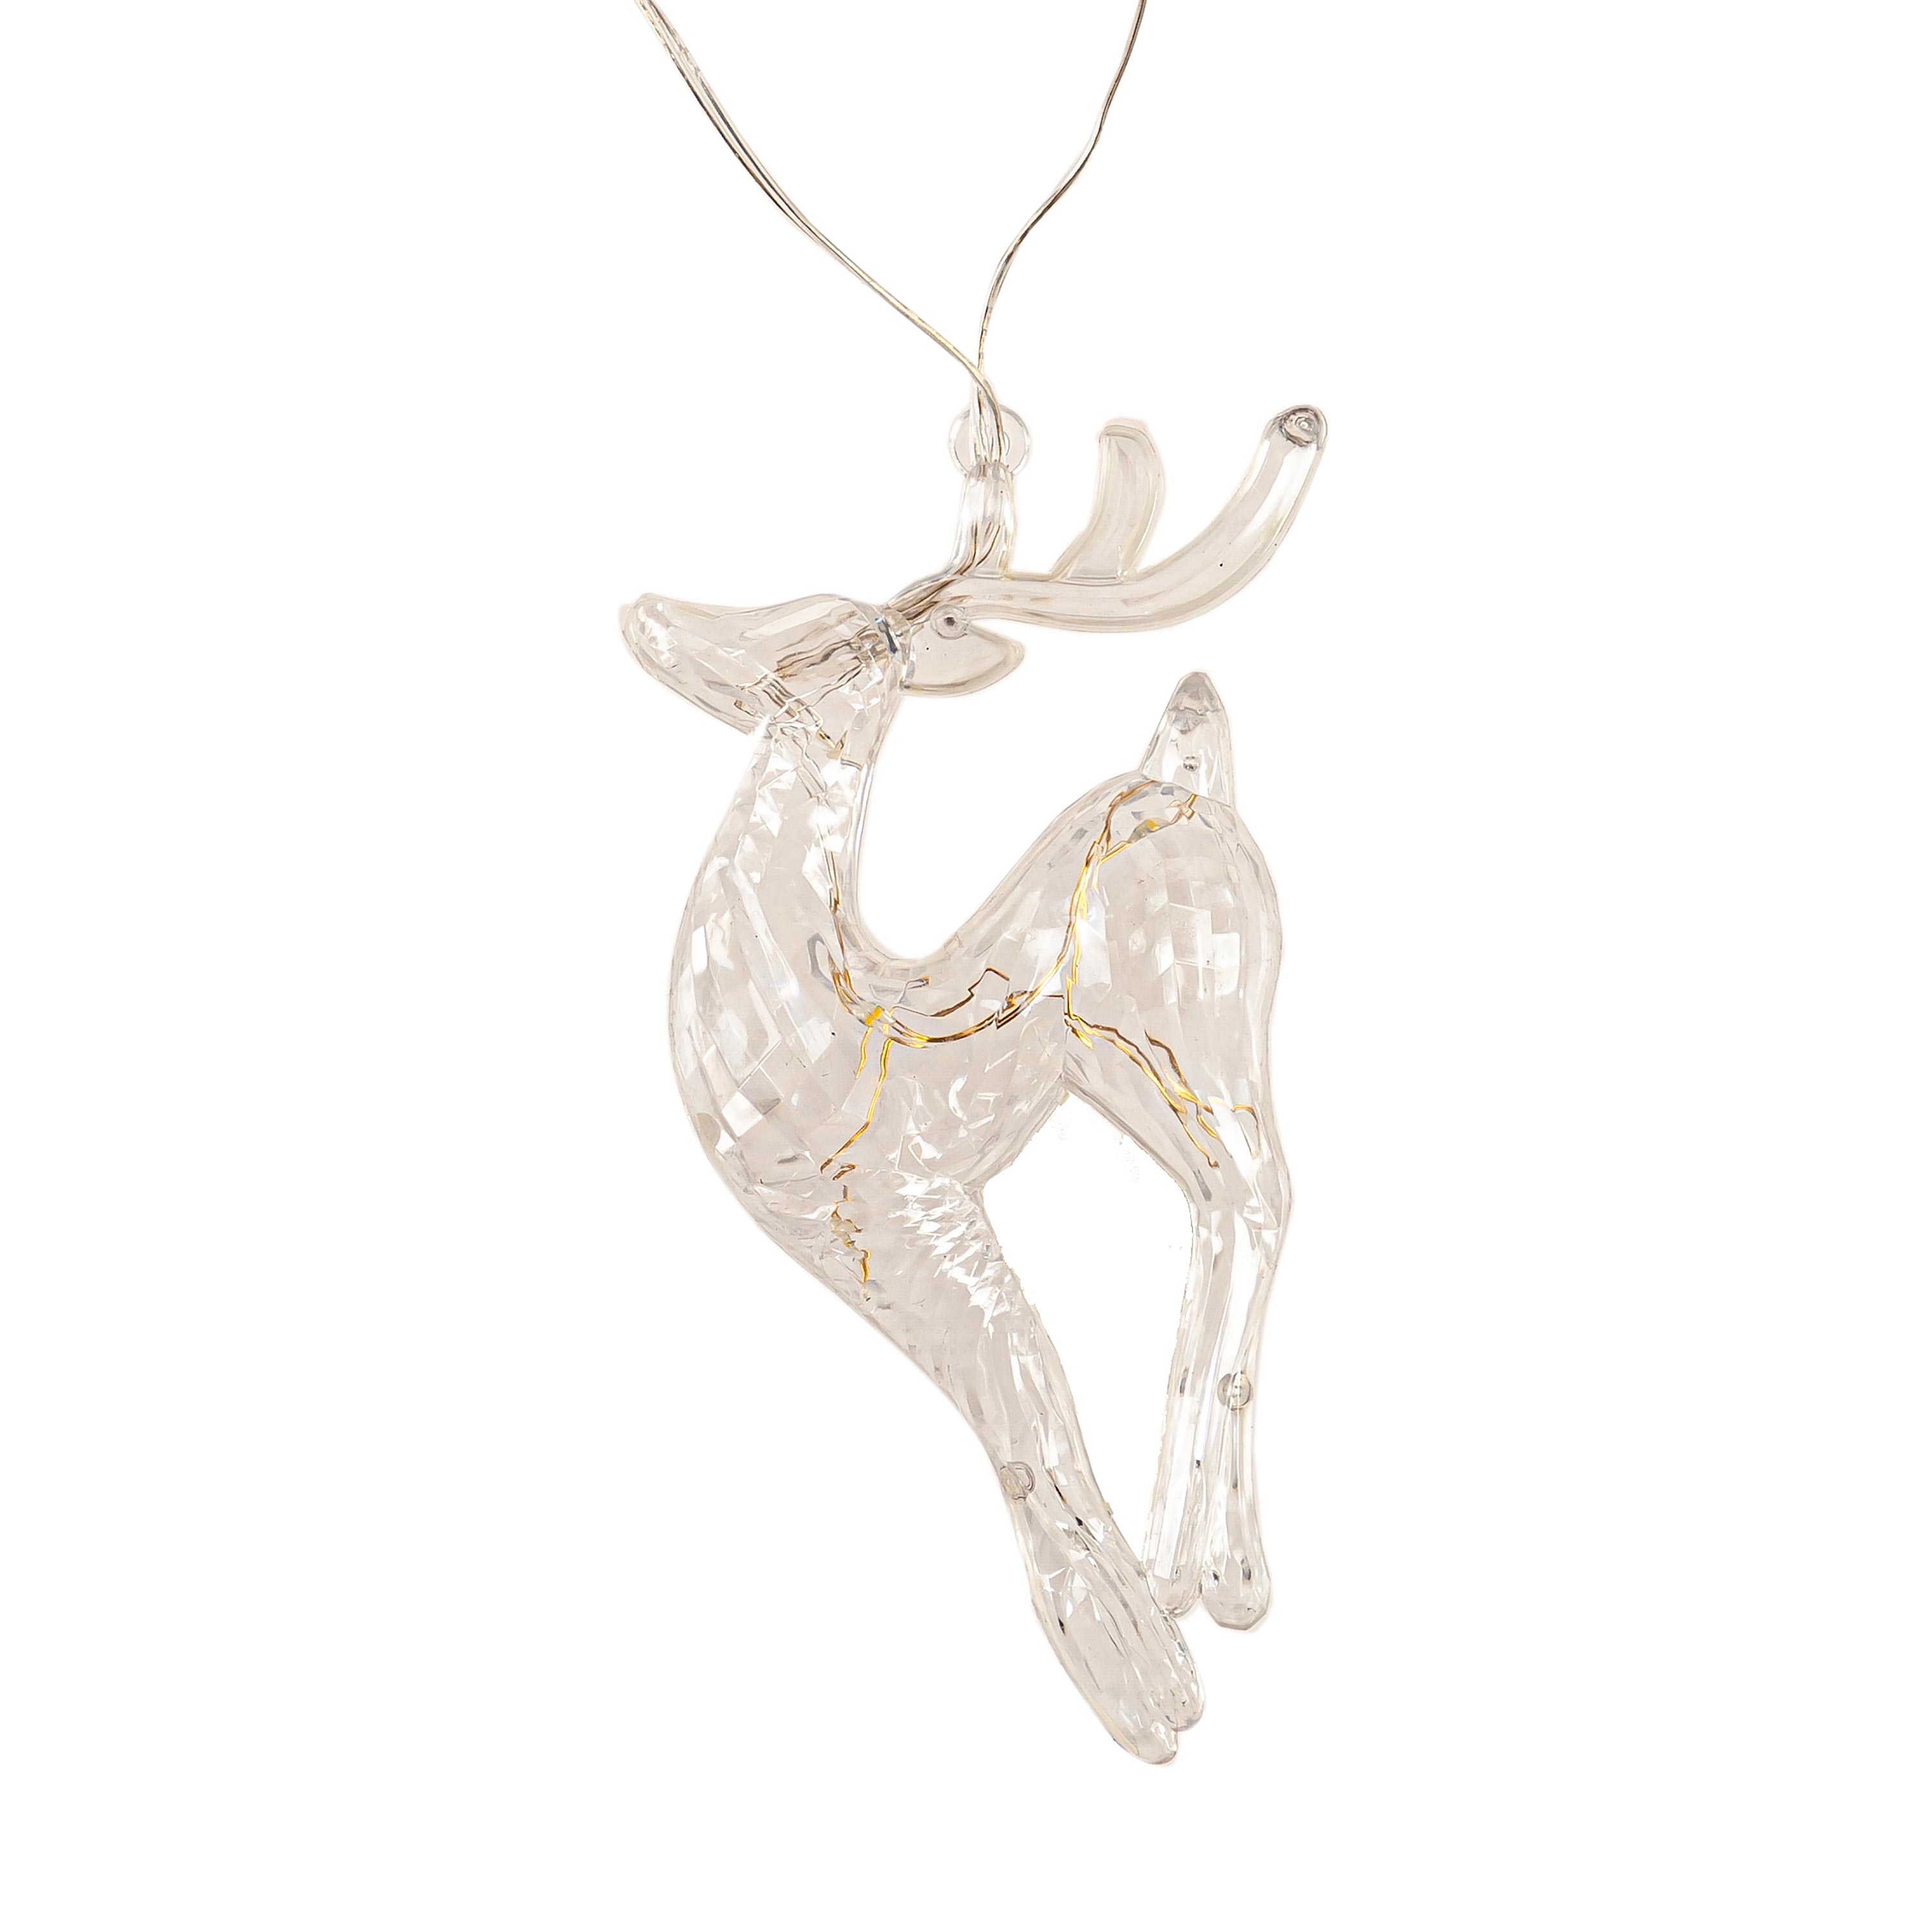 Holiday Deer String Lights | Plow & Hearth